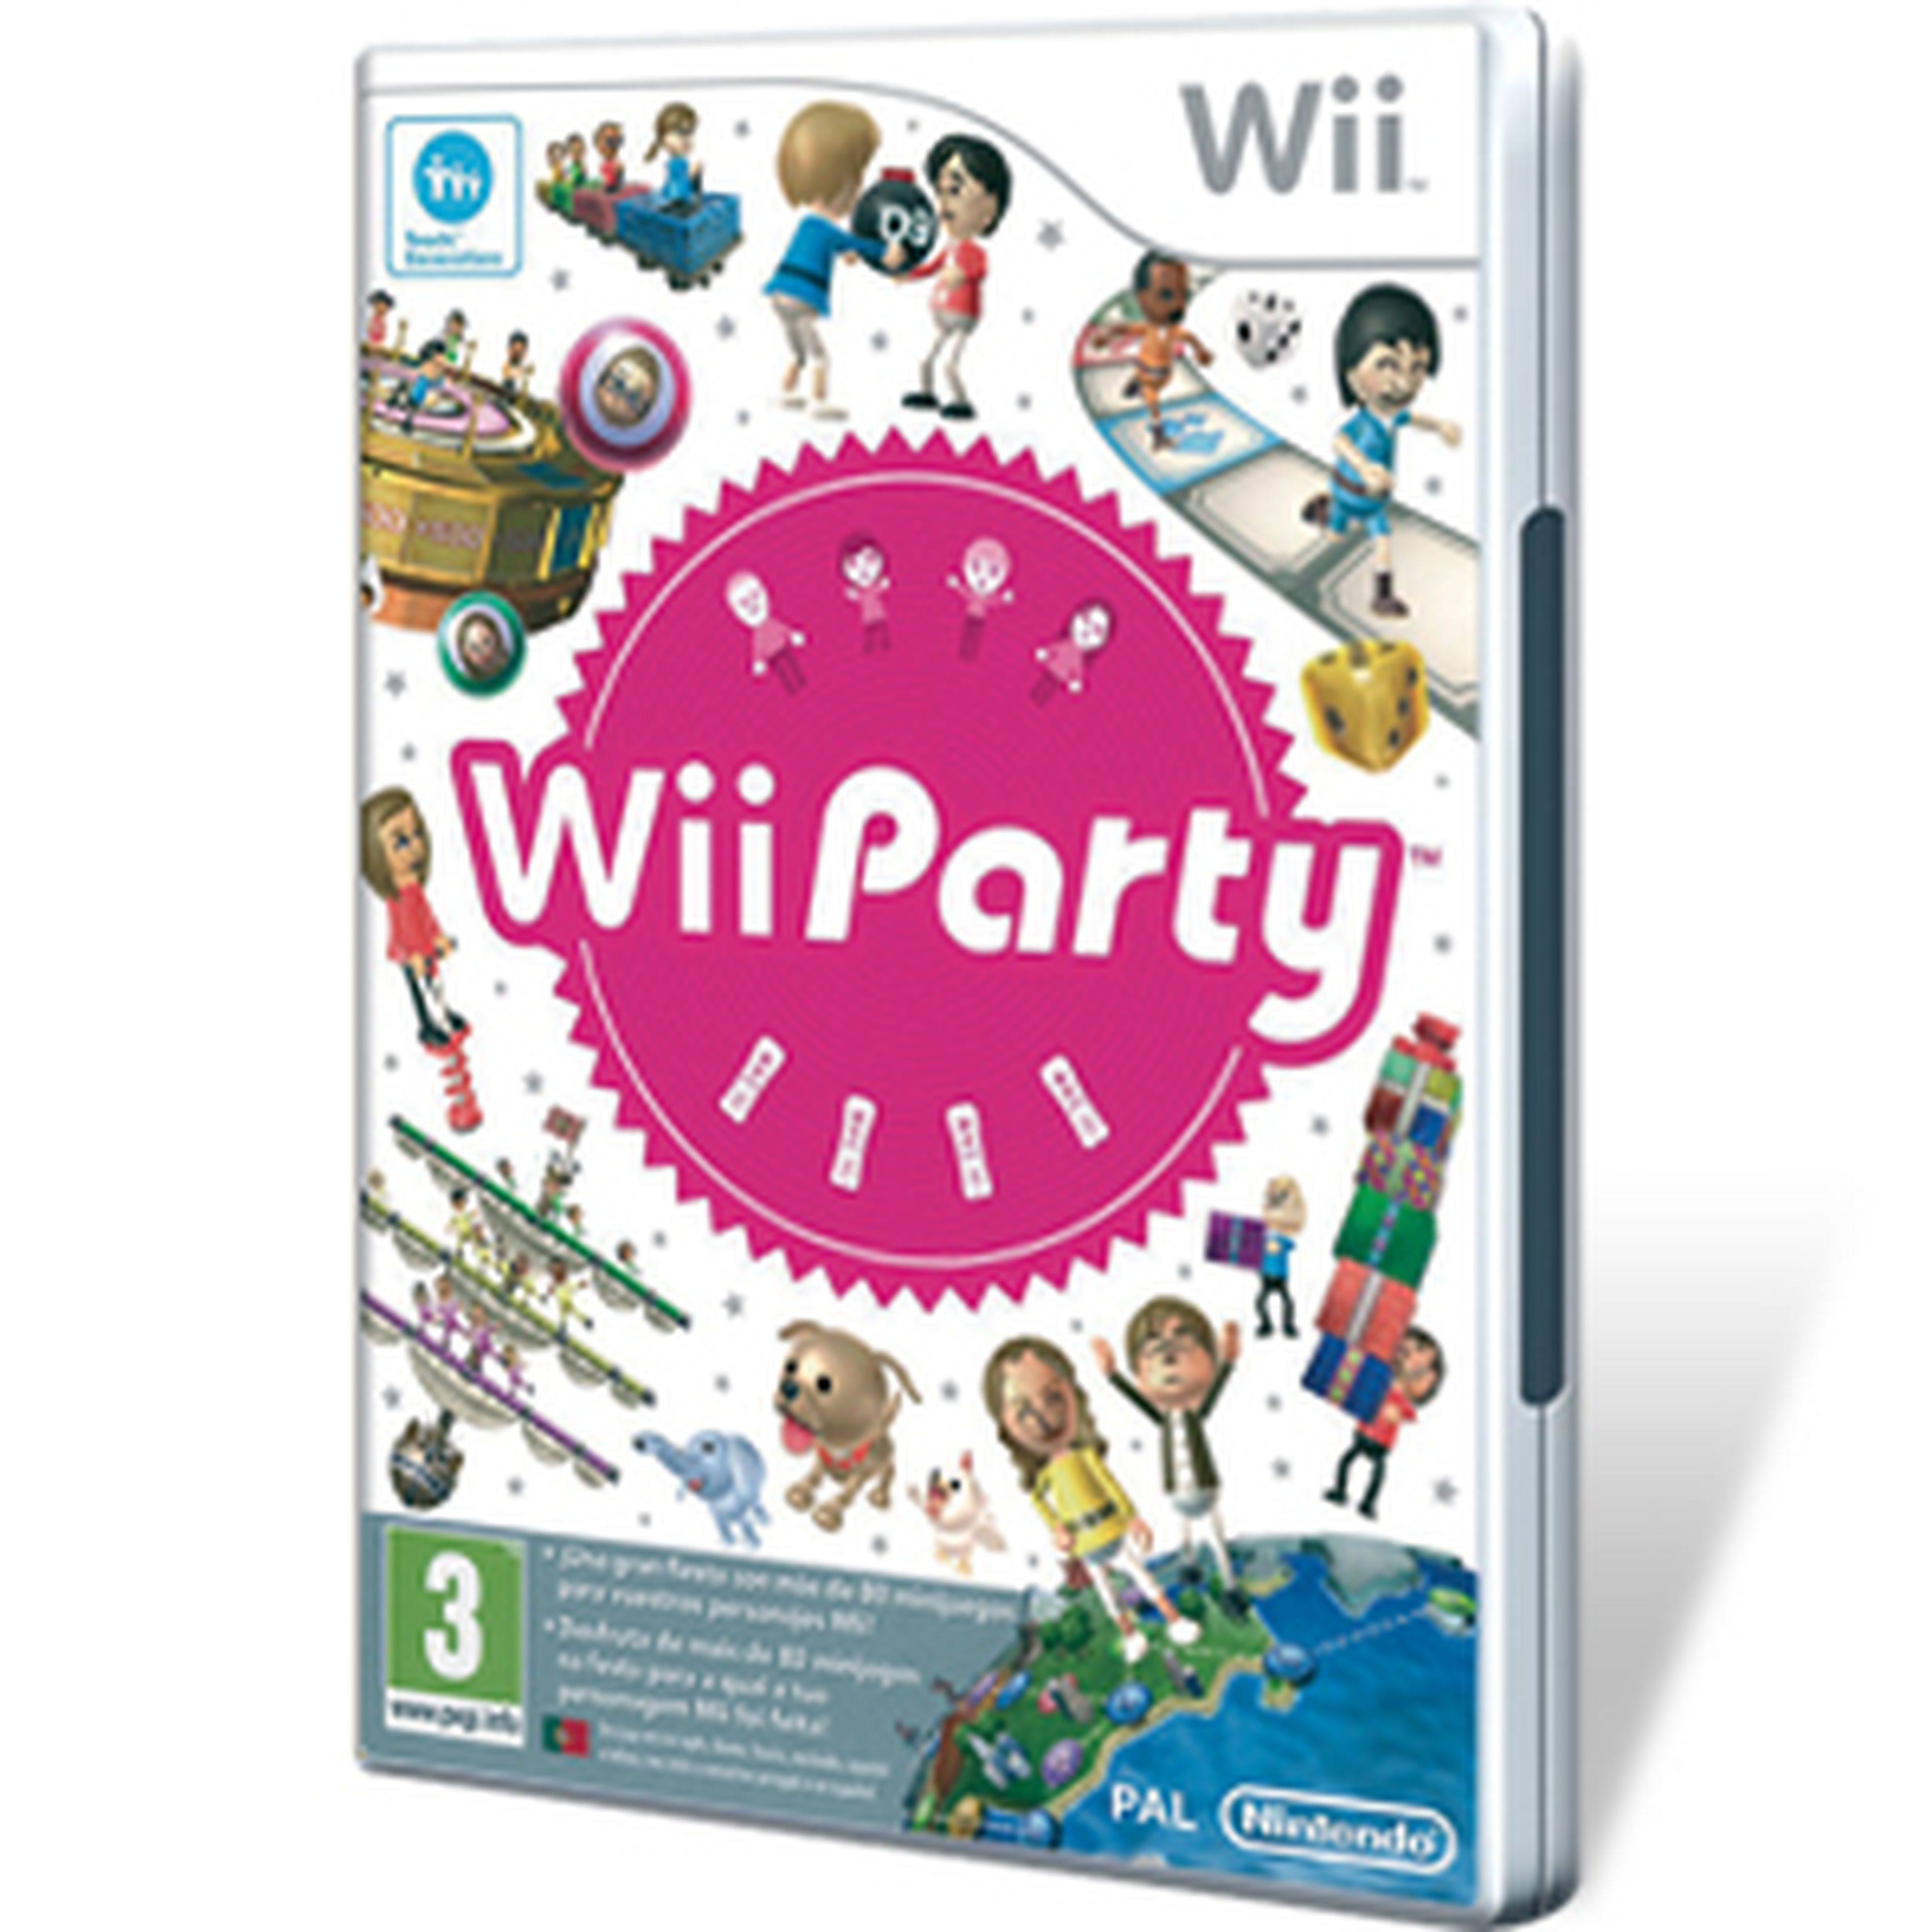 WiiParty para Wii